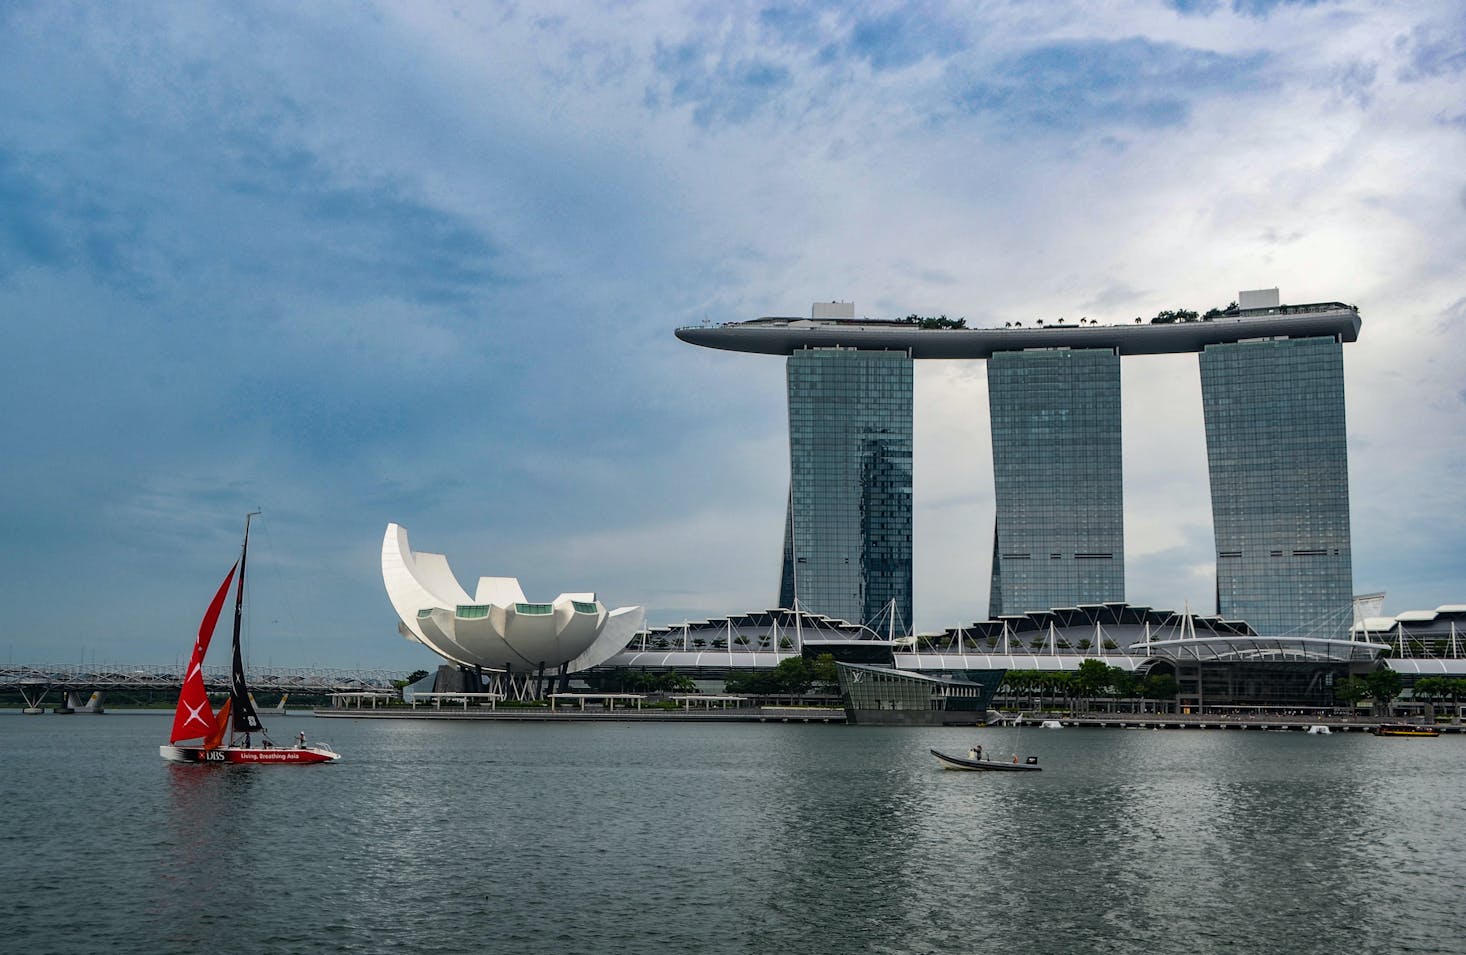 Where to stay in Singapore